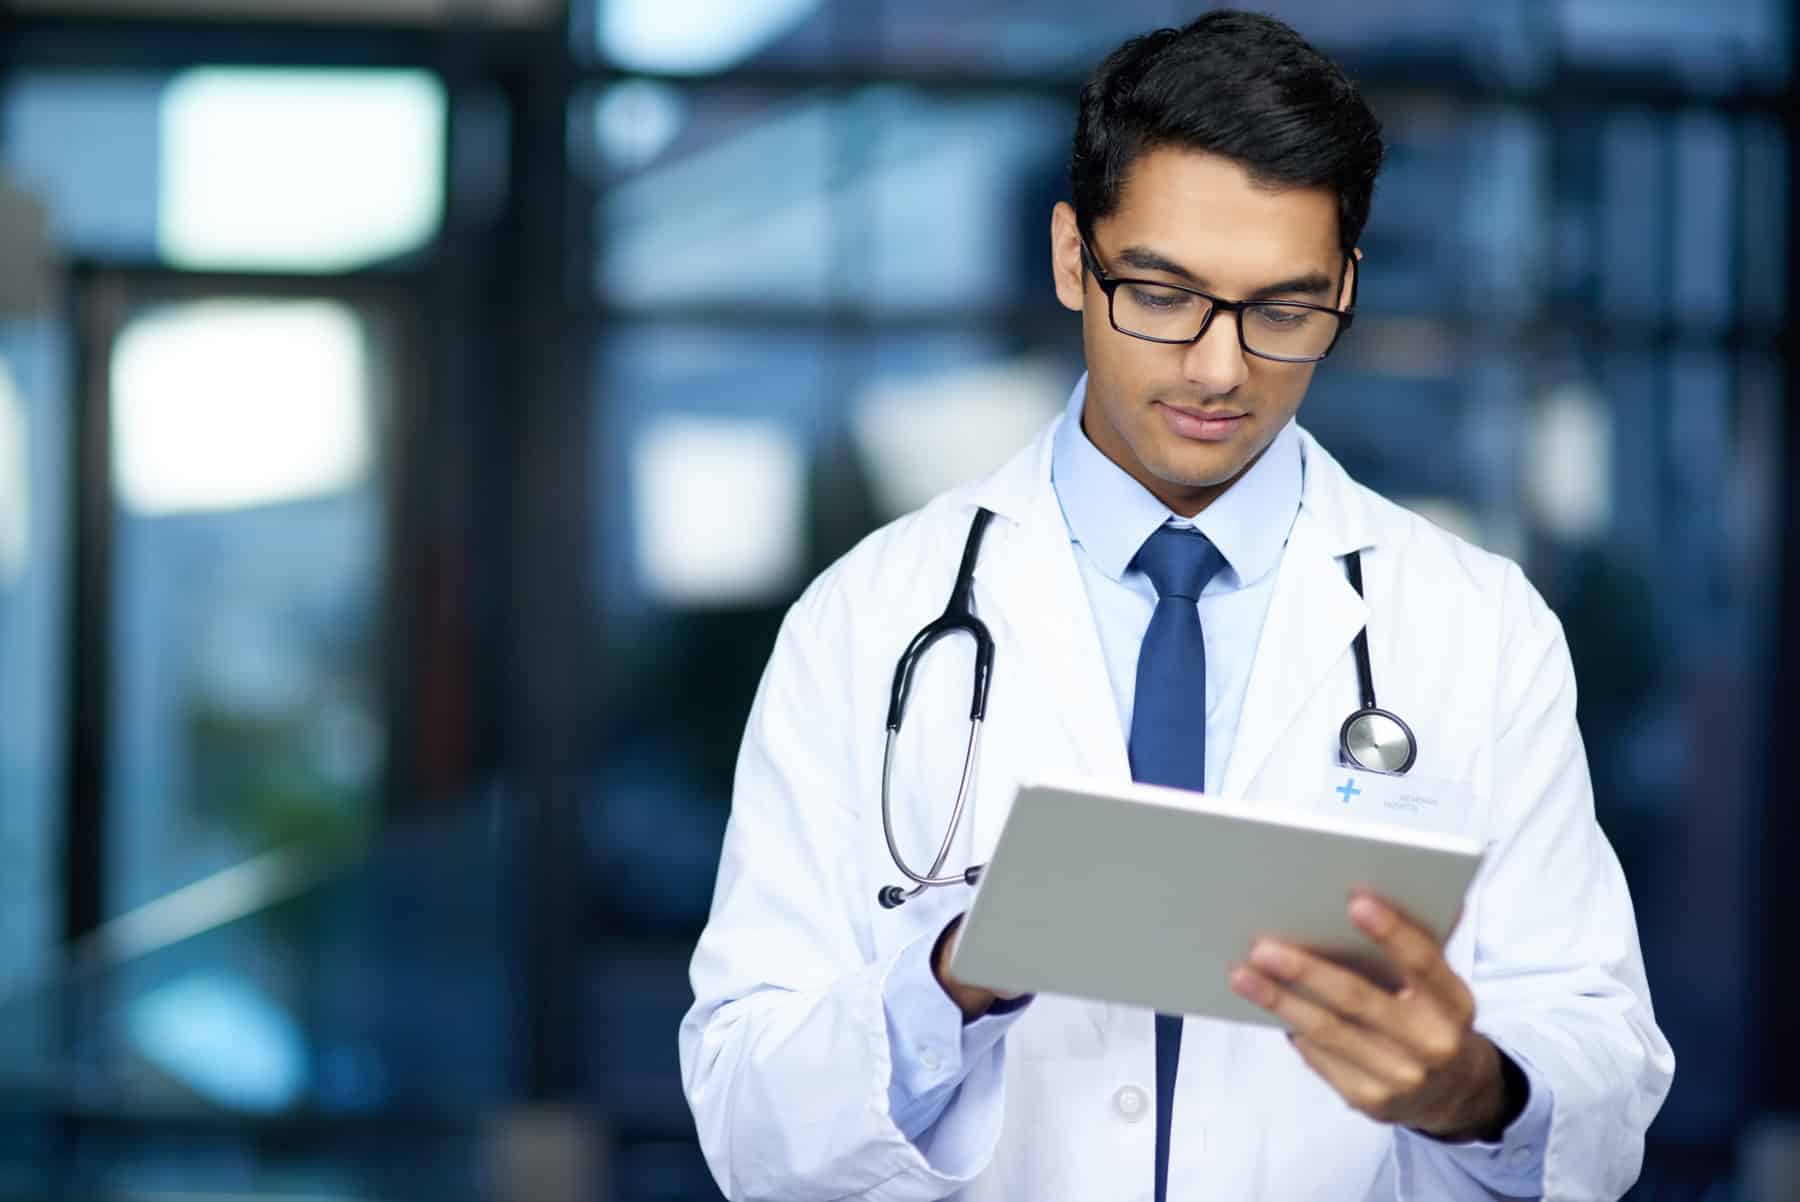 Young doctor reviewing EHR information on tablet